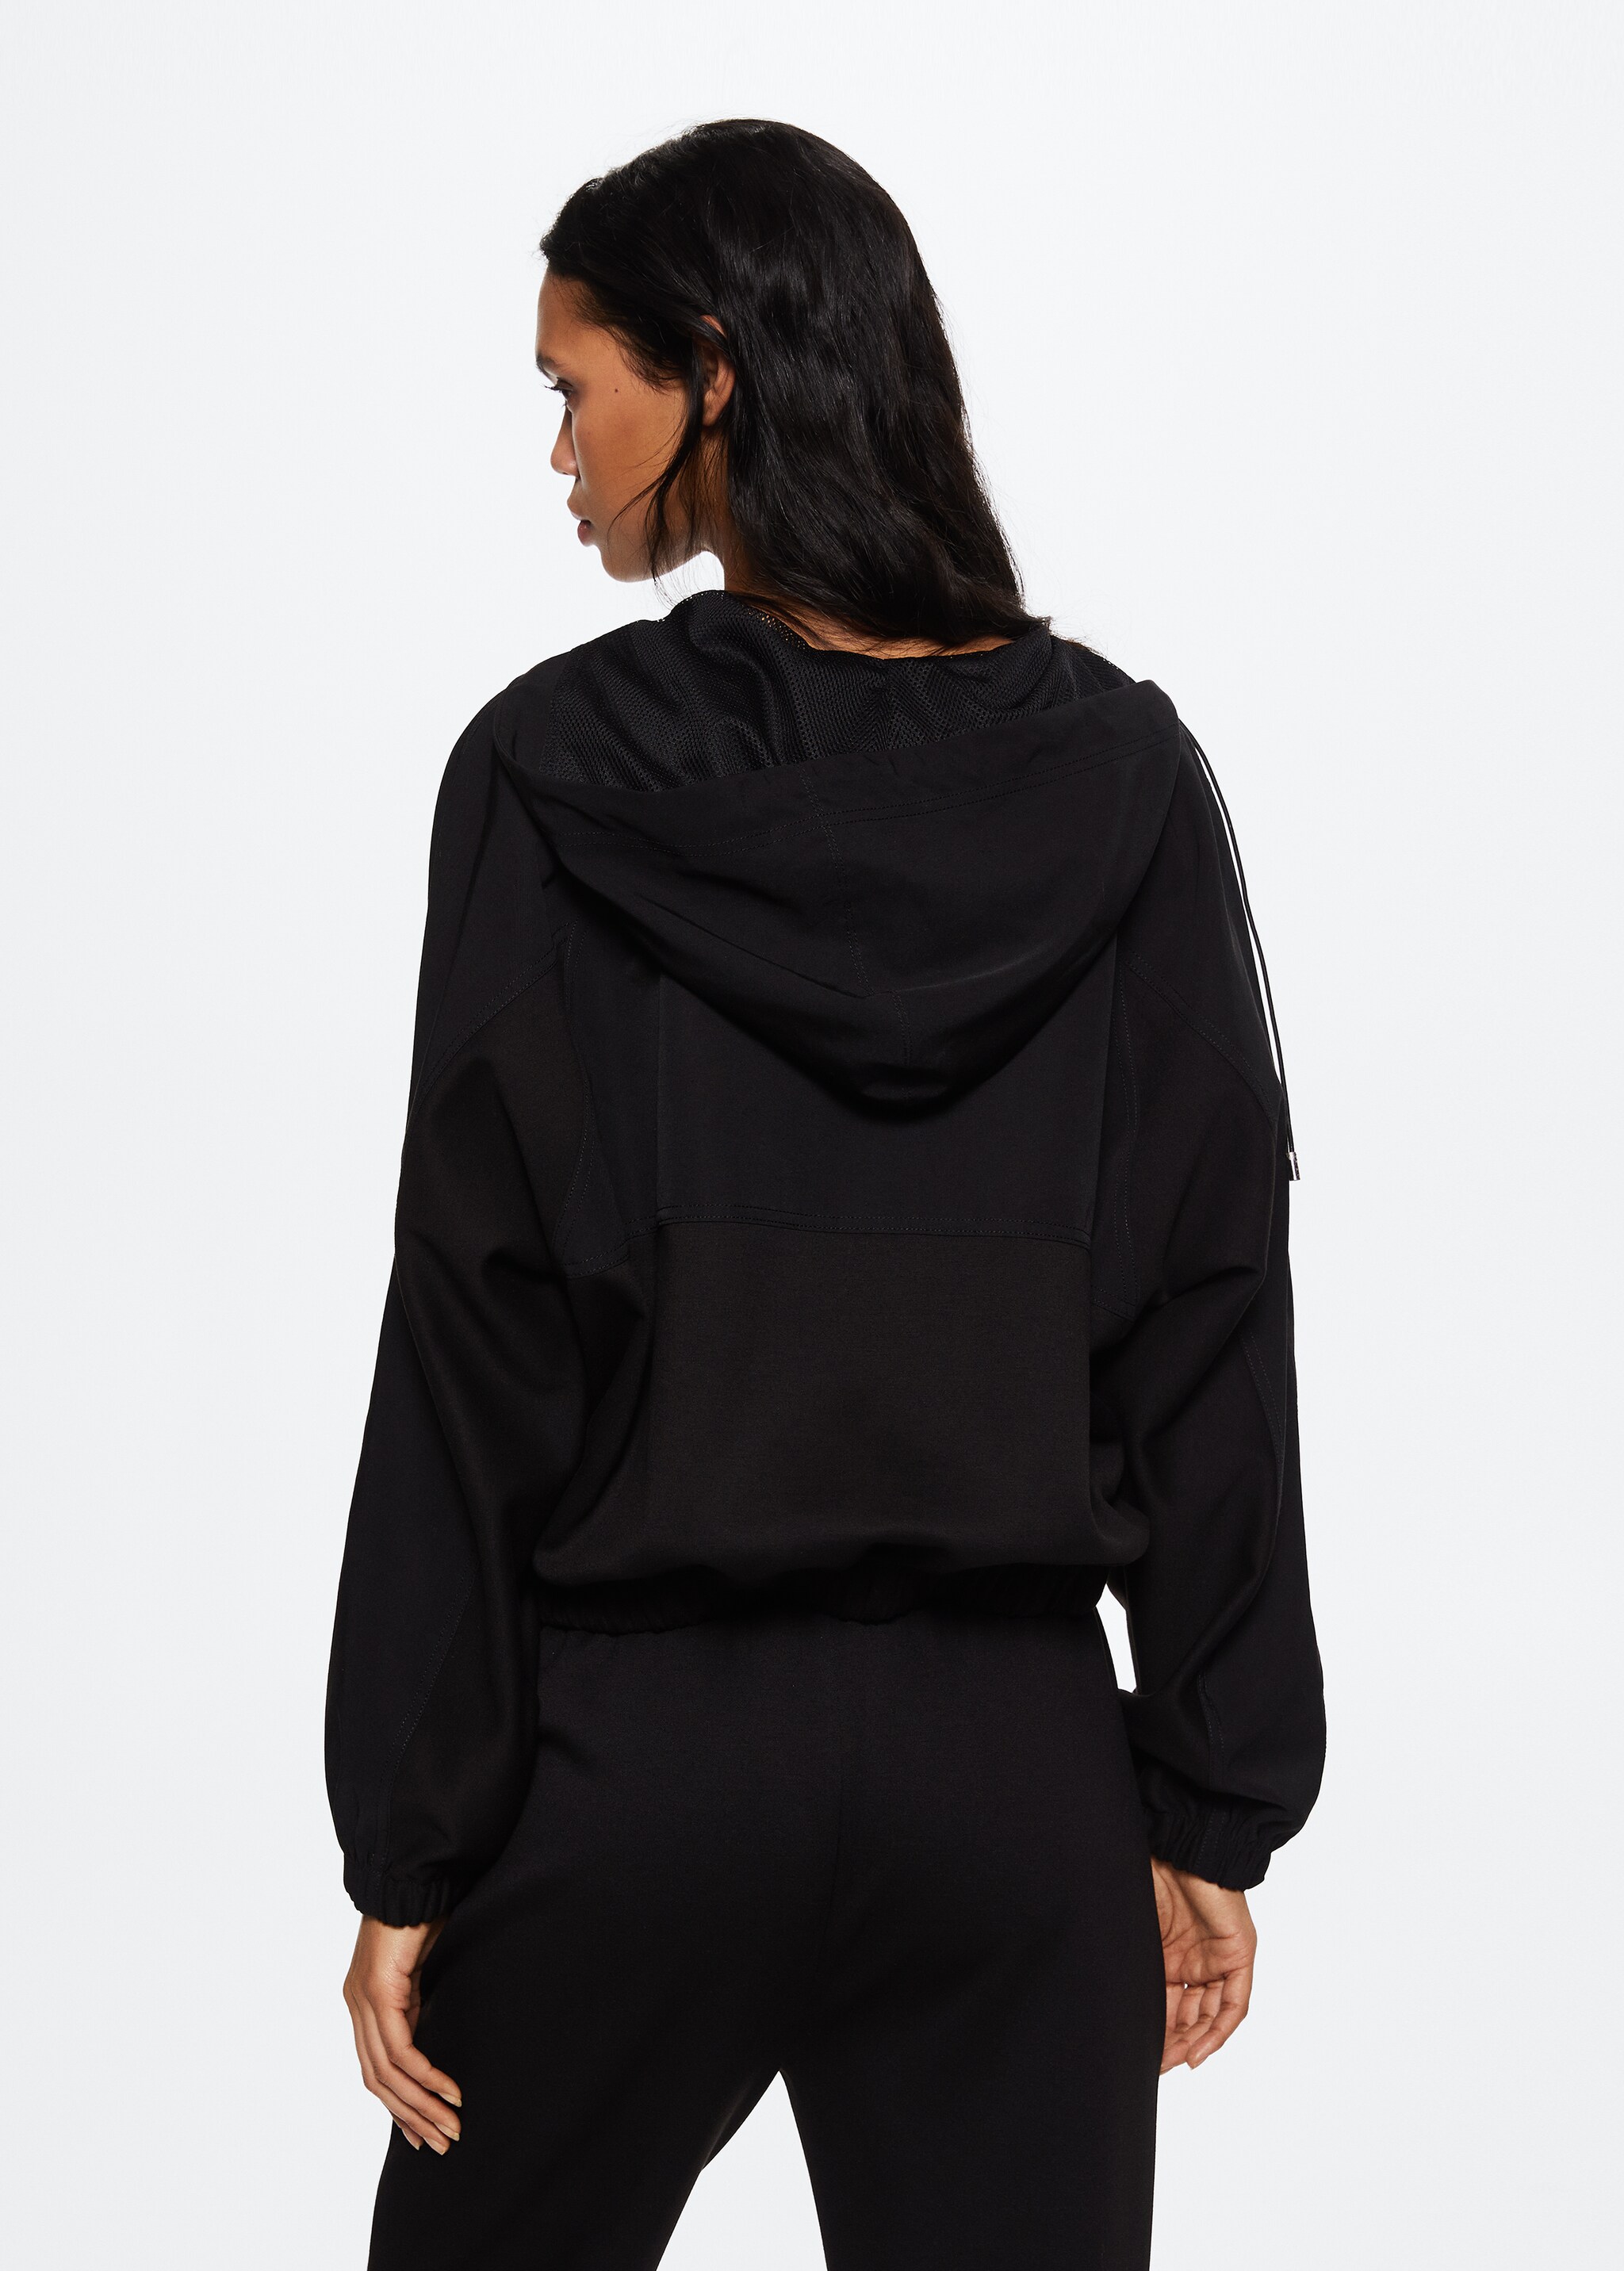 Oversized sweatshirt with pockets - Reverse of the article